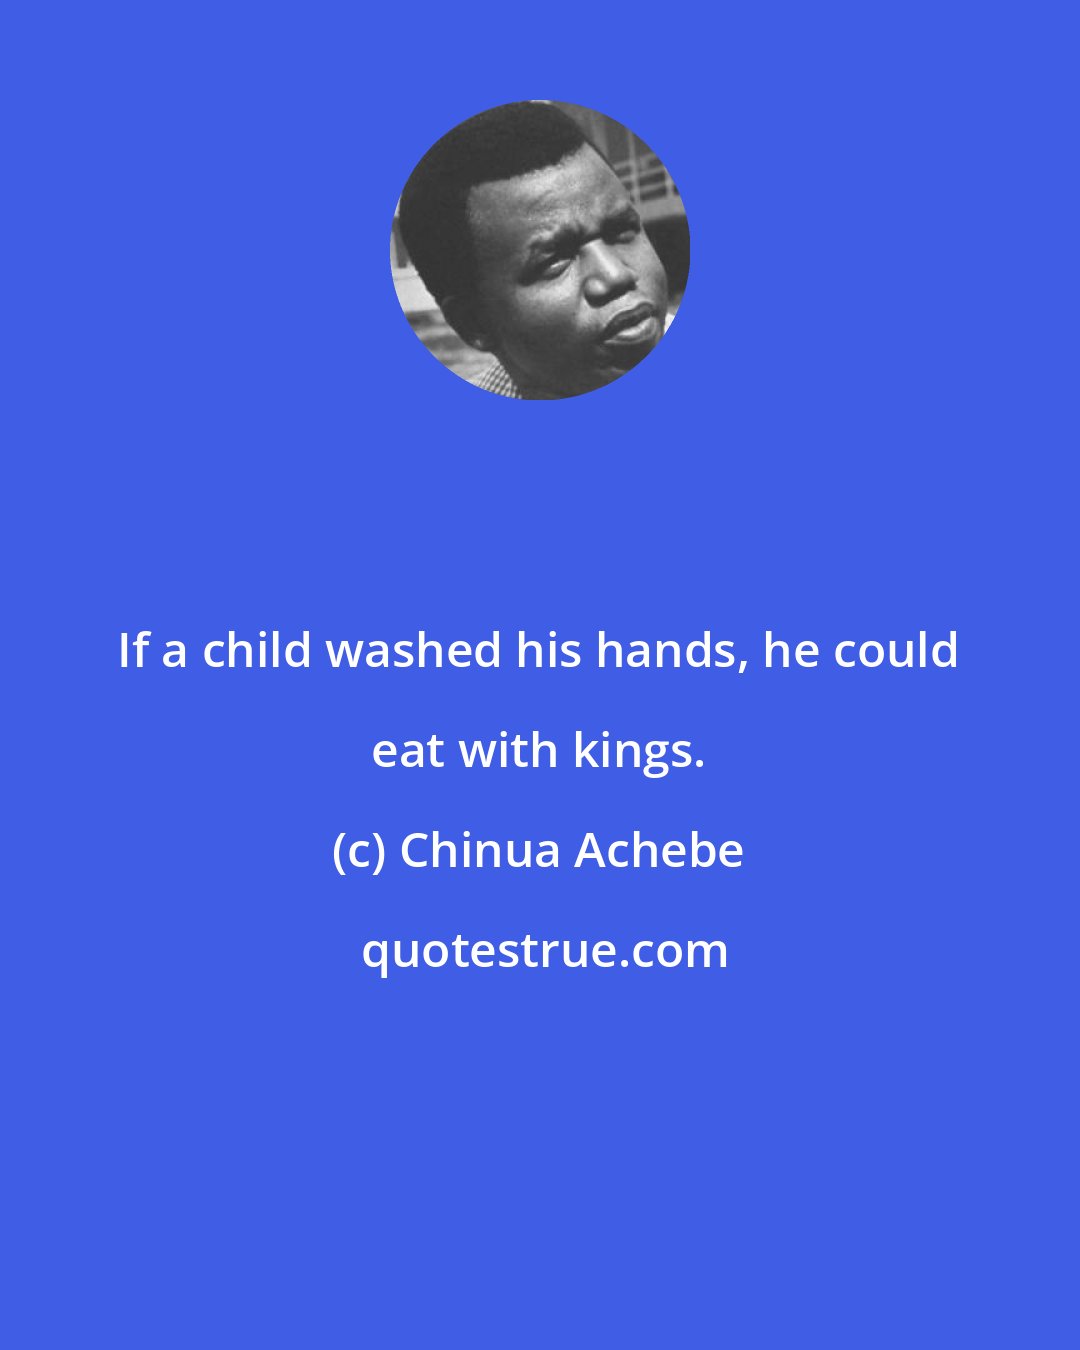 Chinua Achebe: If a child washed his hands, he could eat with kings.